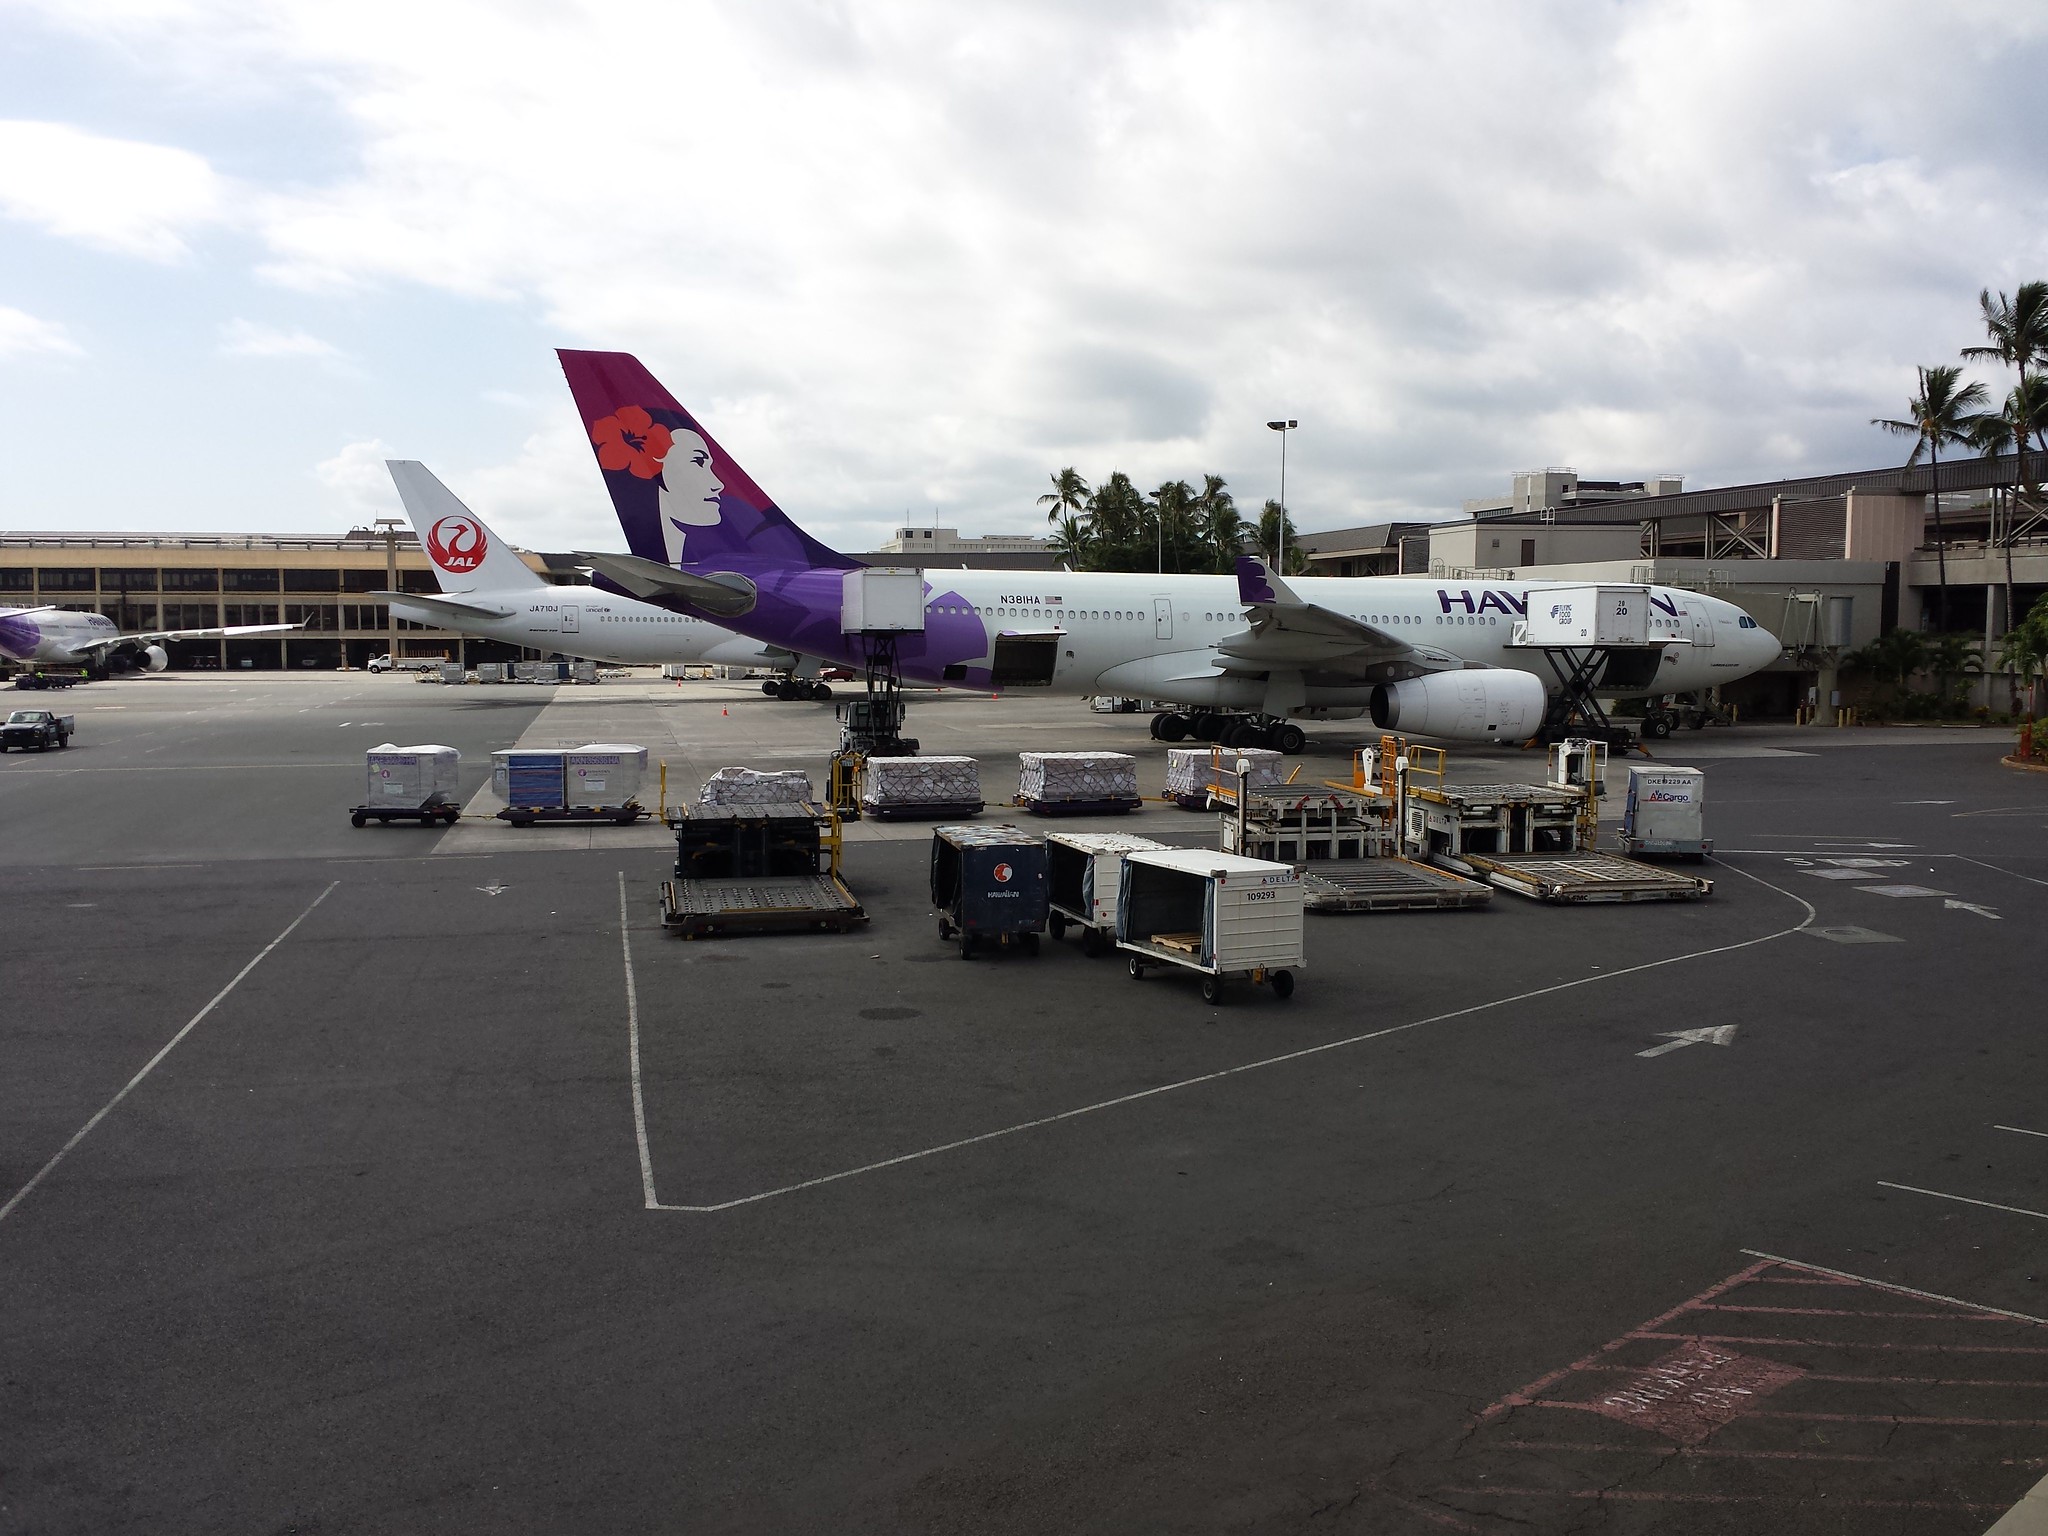 The view at Honolulu airport